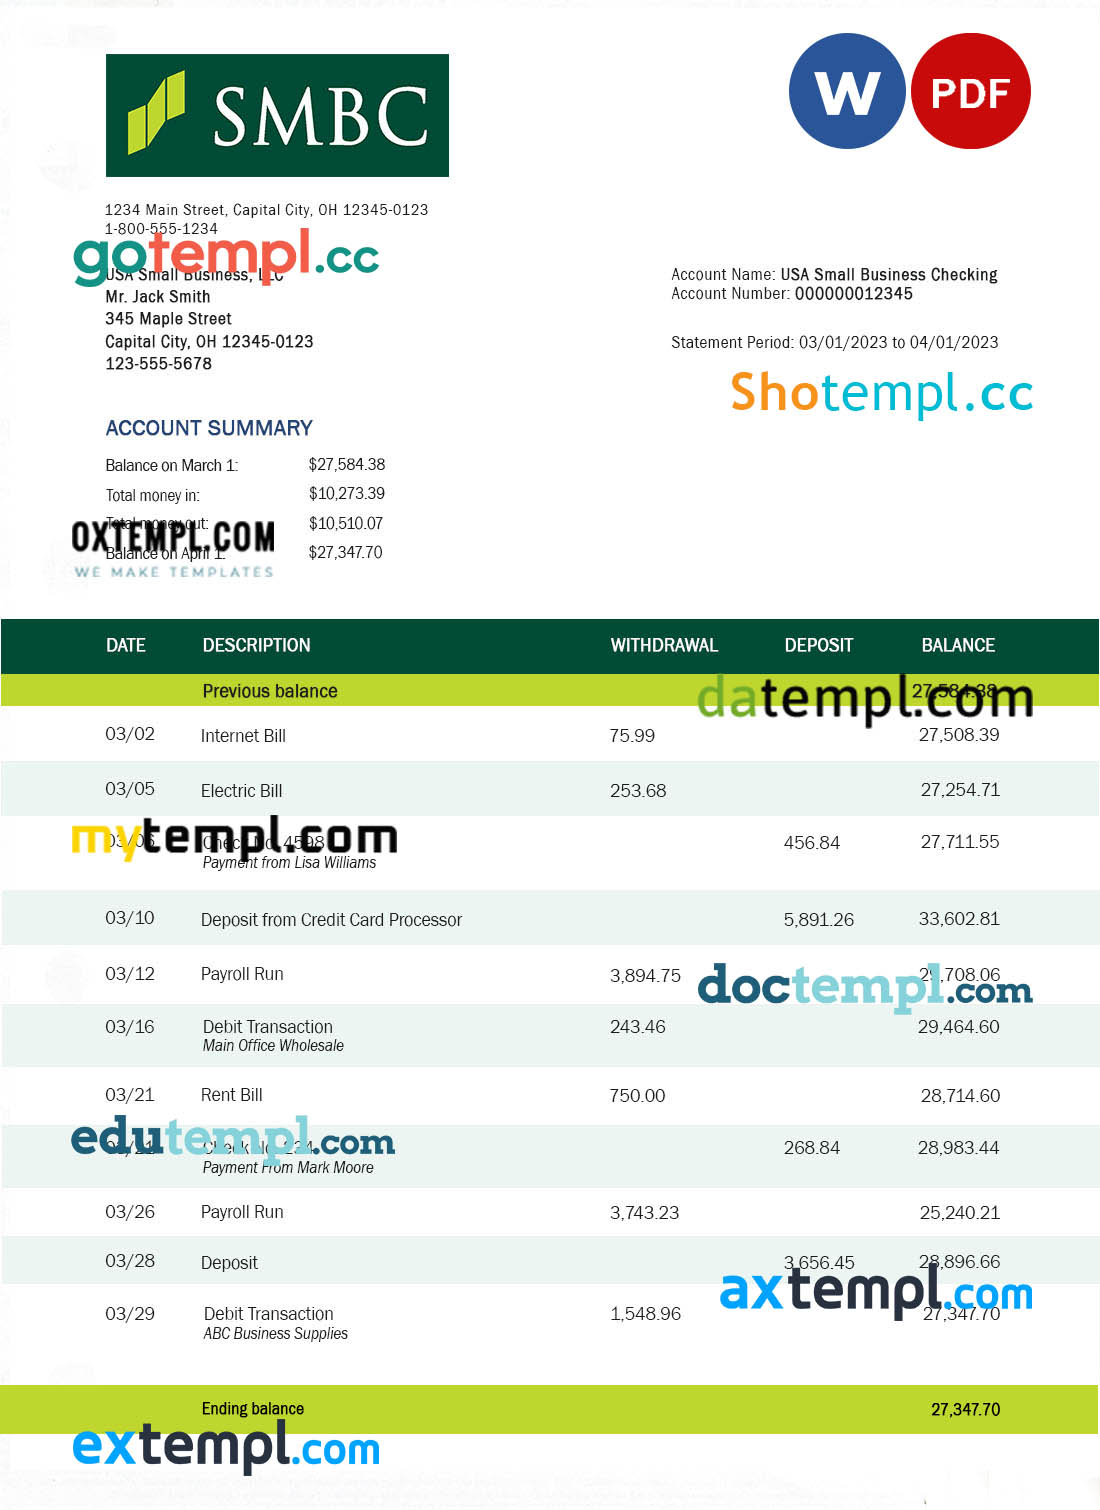 editable template, SMBC Bank firm account statement Word and PDF template